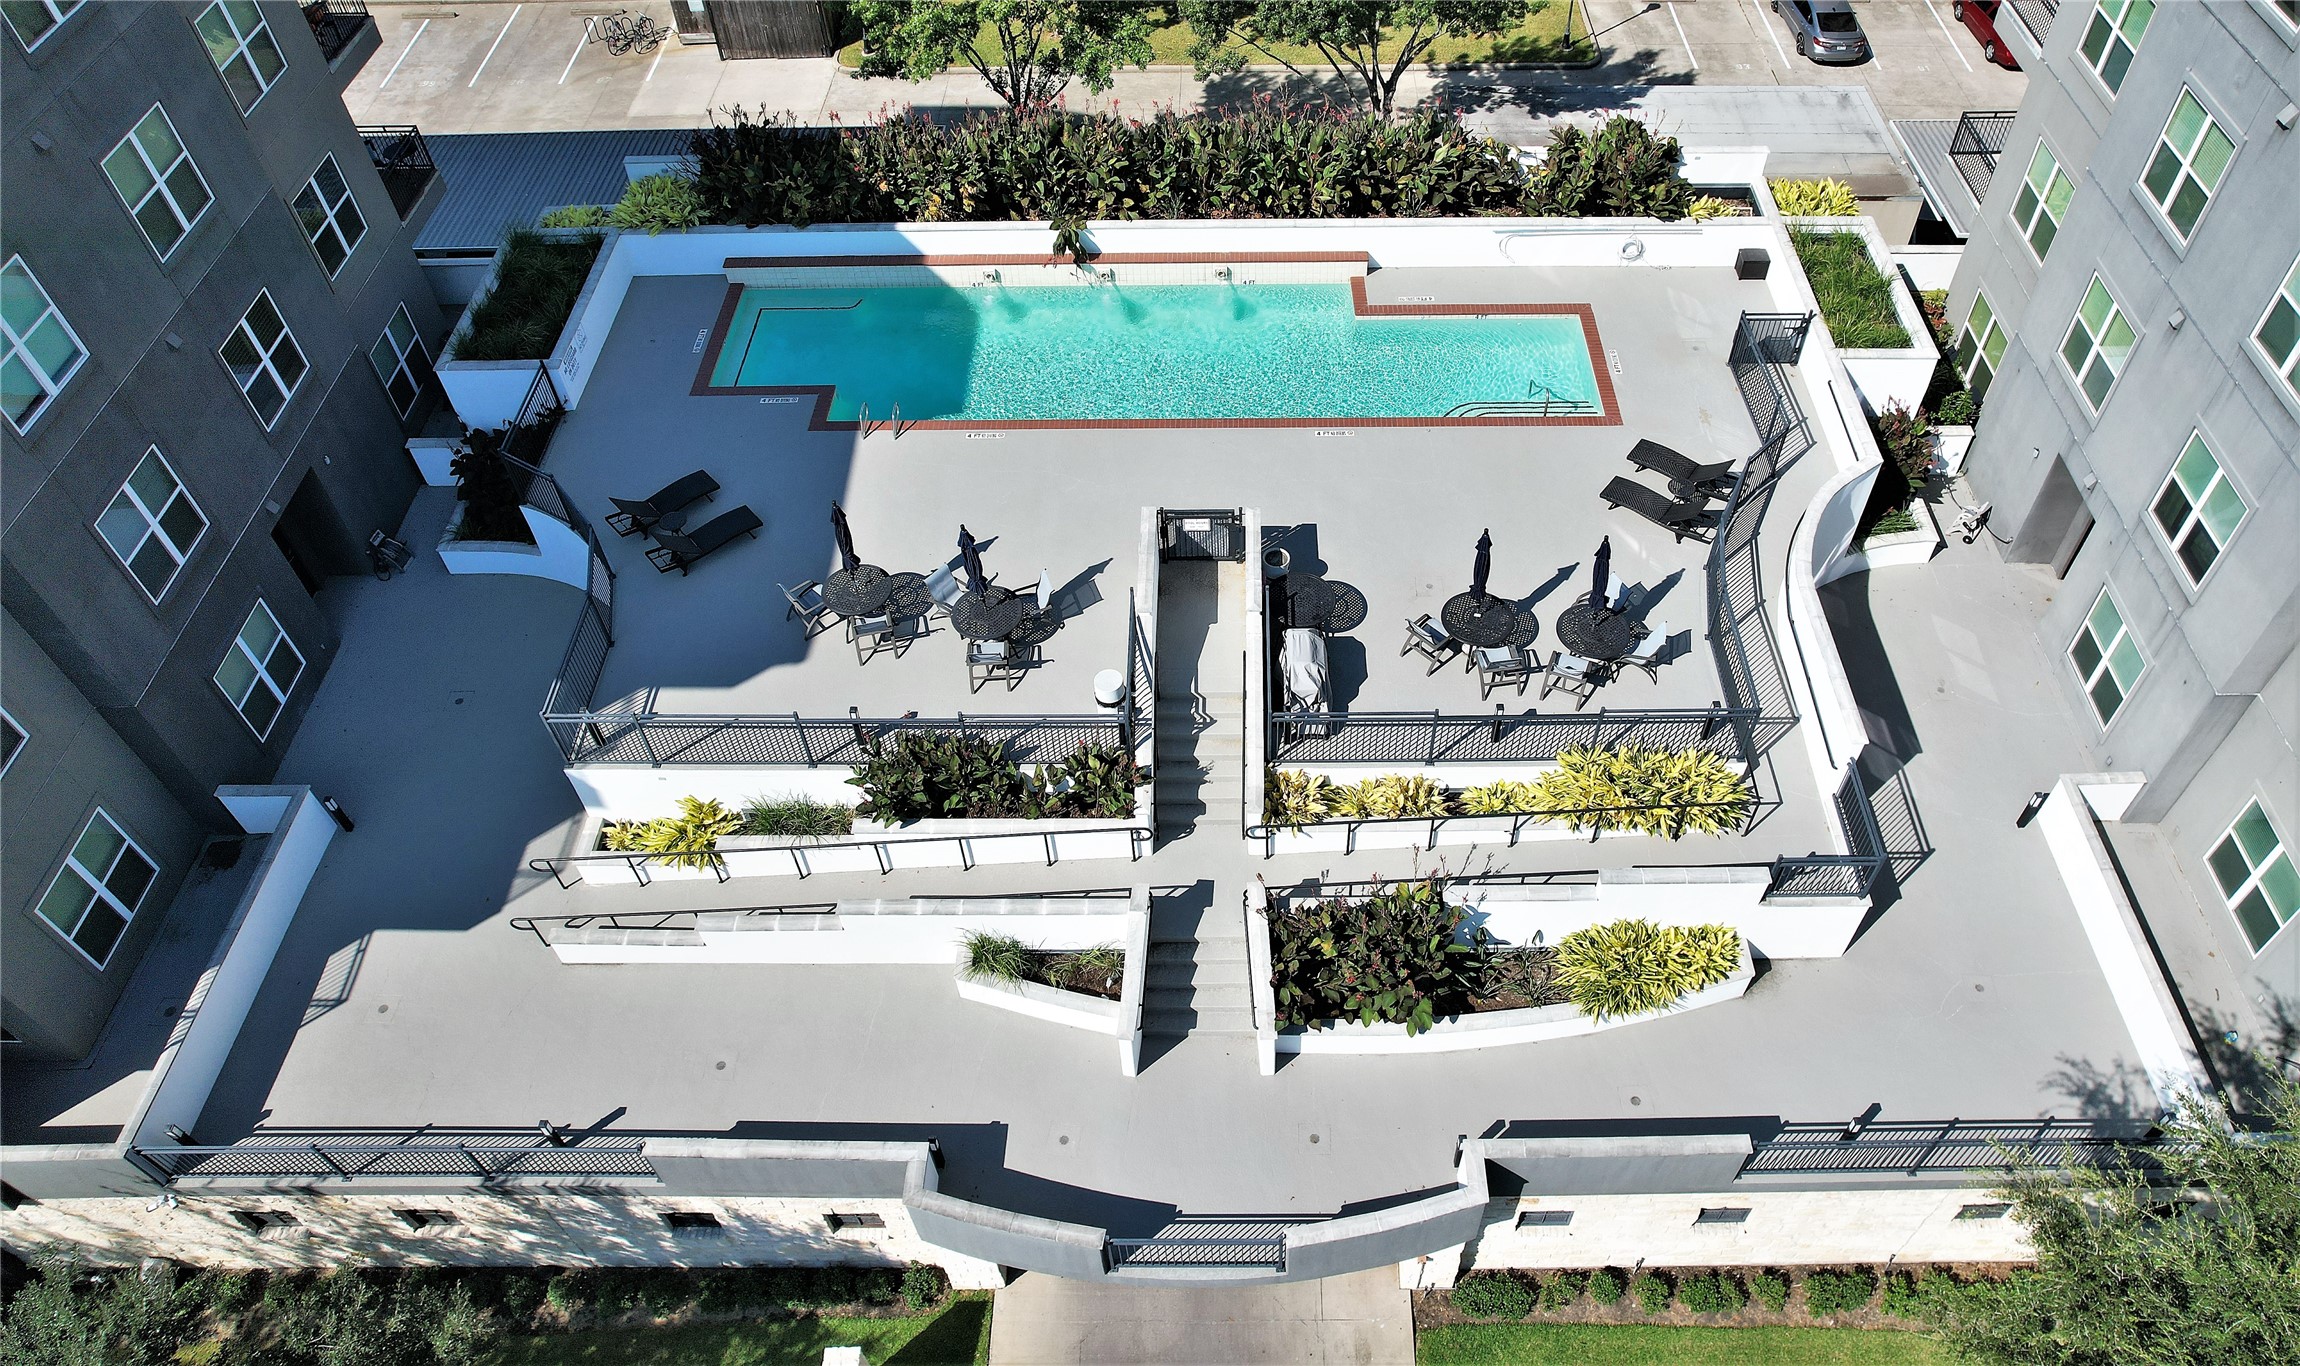 View from above pool. Relax and enjoy the lifestyle.